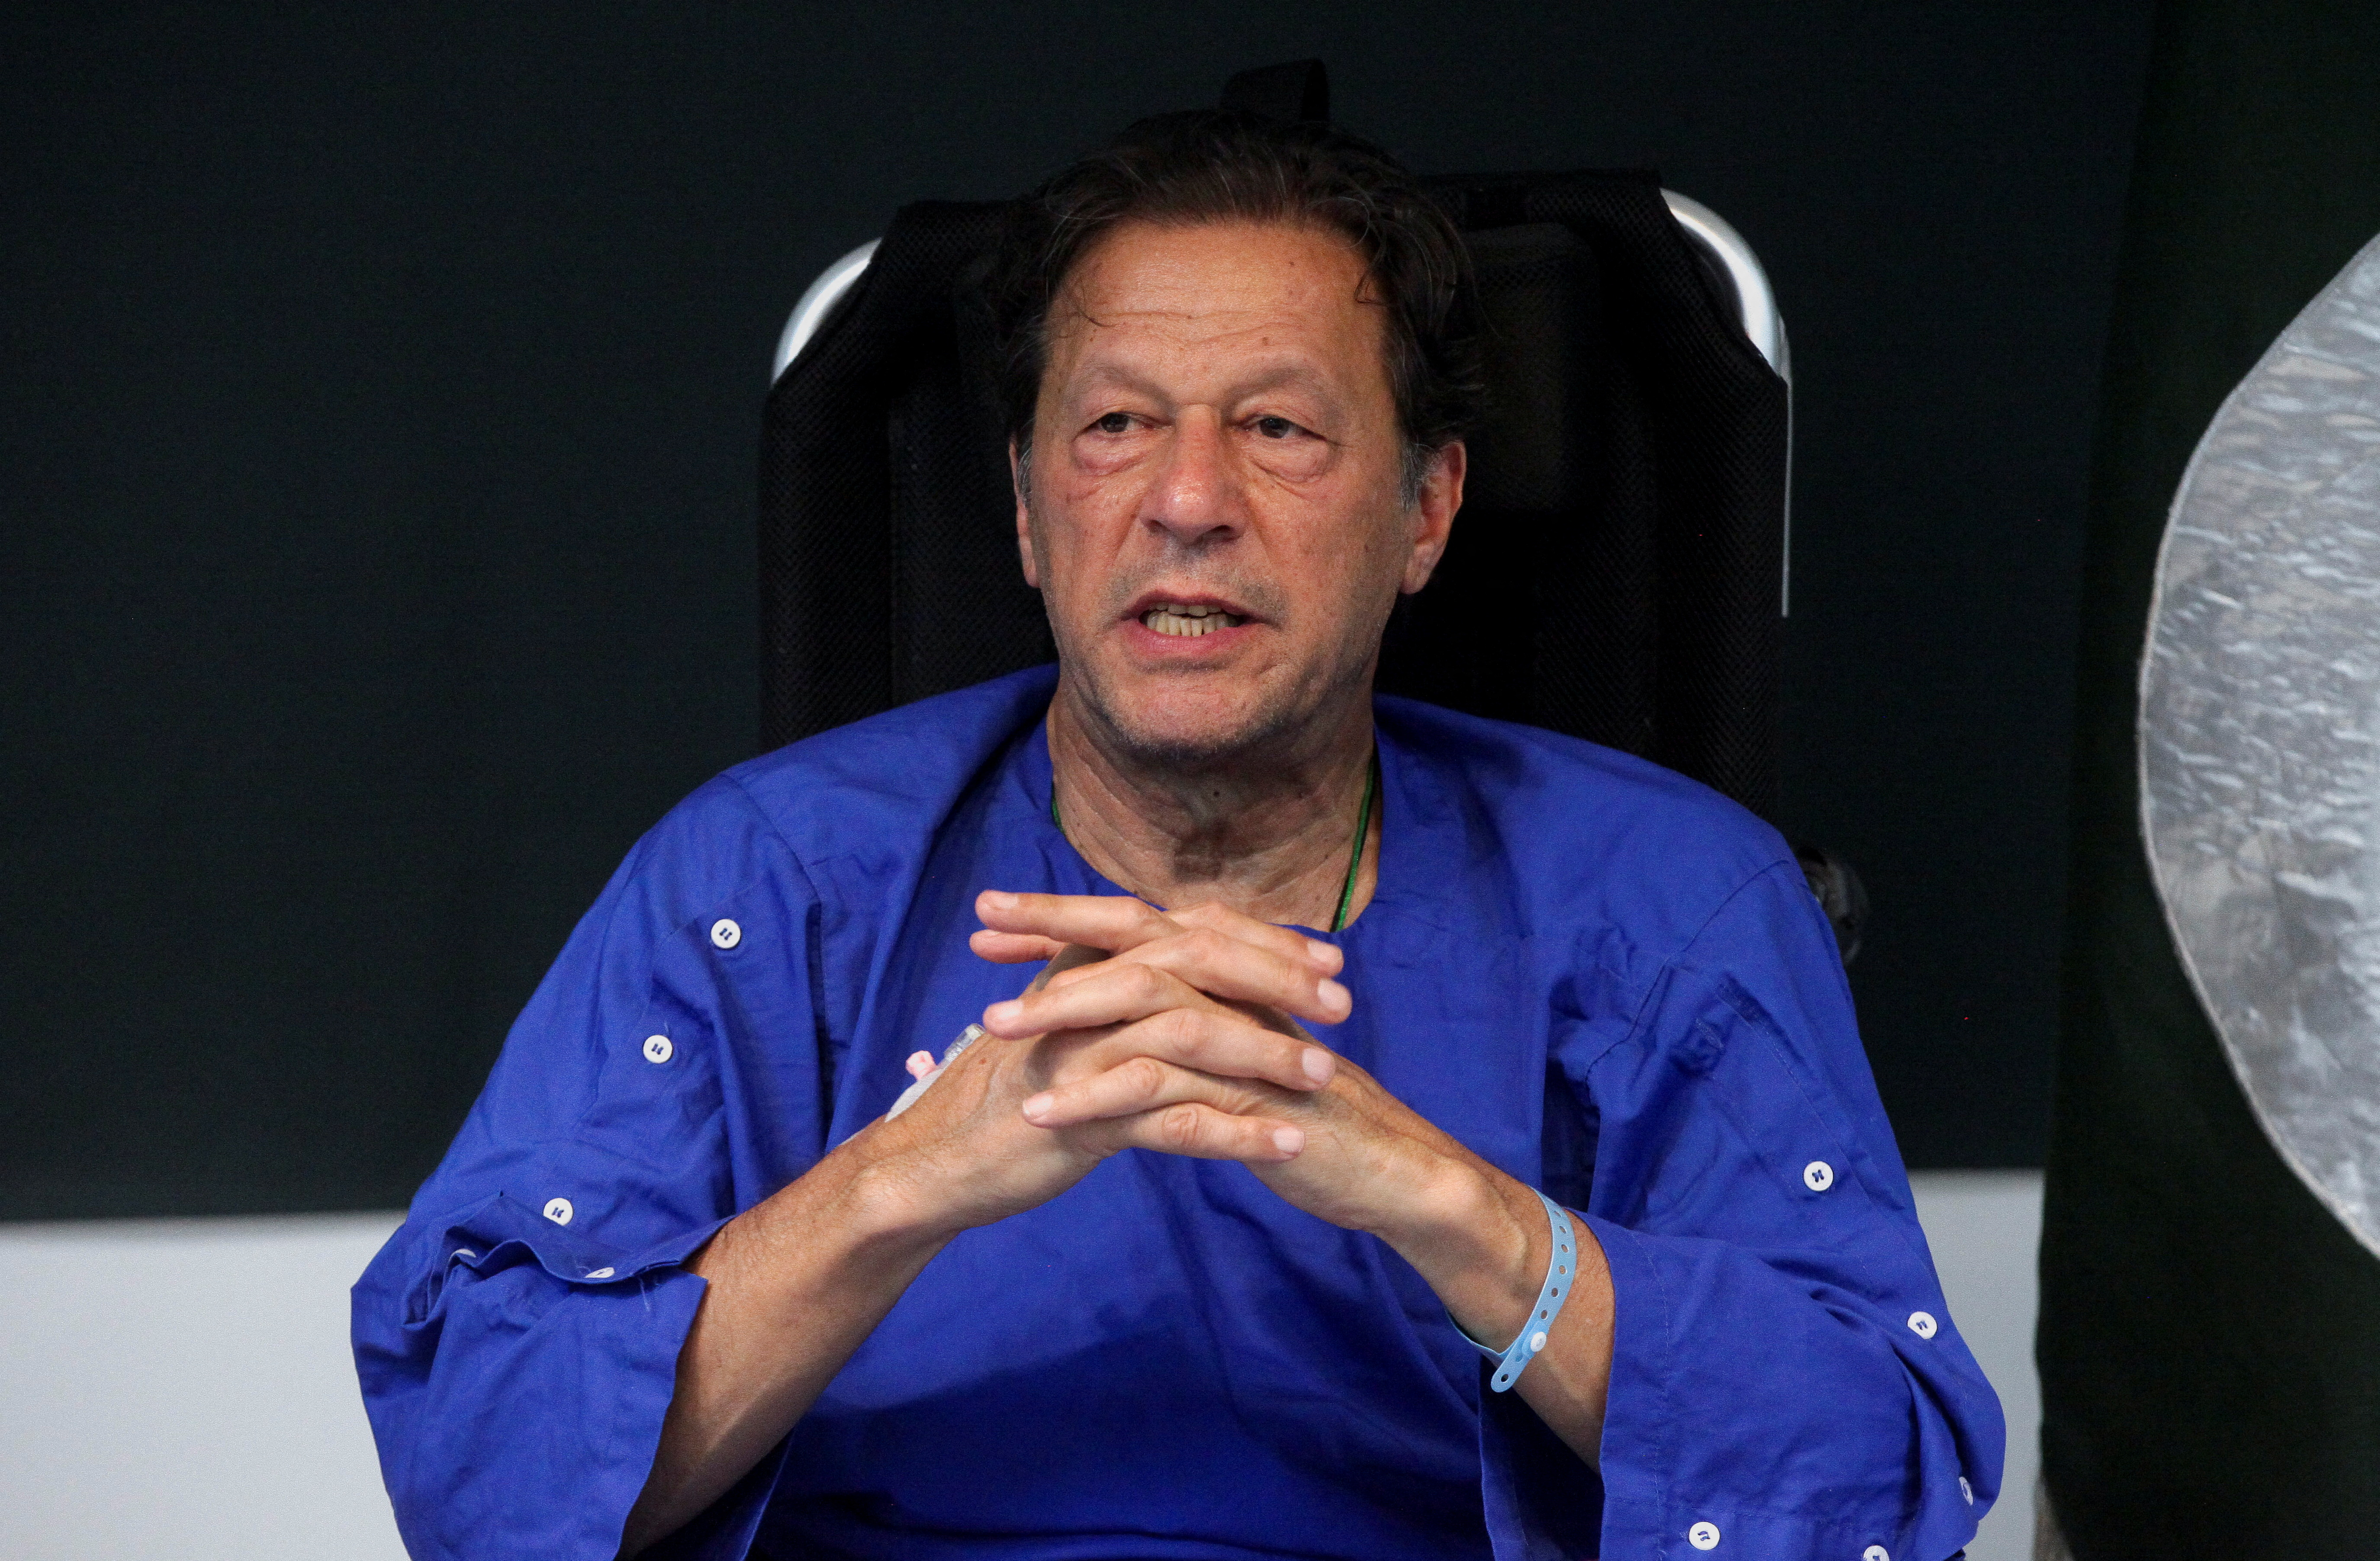 Former Pakistan's Prime Minister Imran Khan addresses a news conference after he was wounded following a shooting incident during a long march in Wazirabad